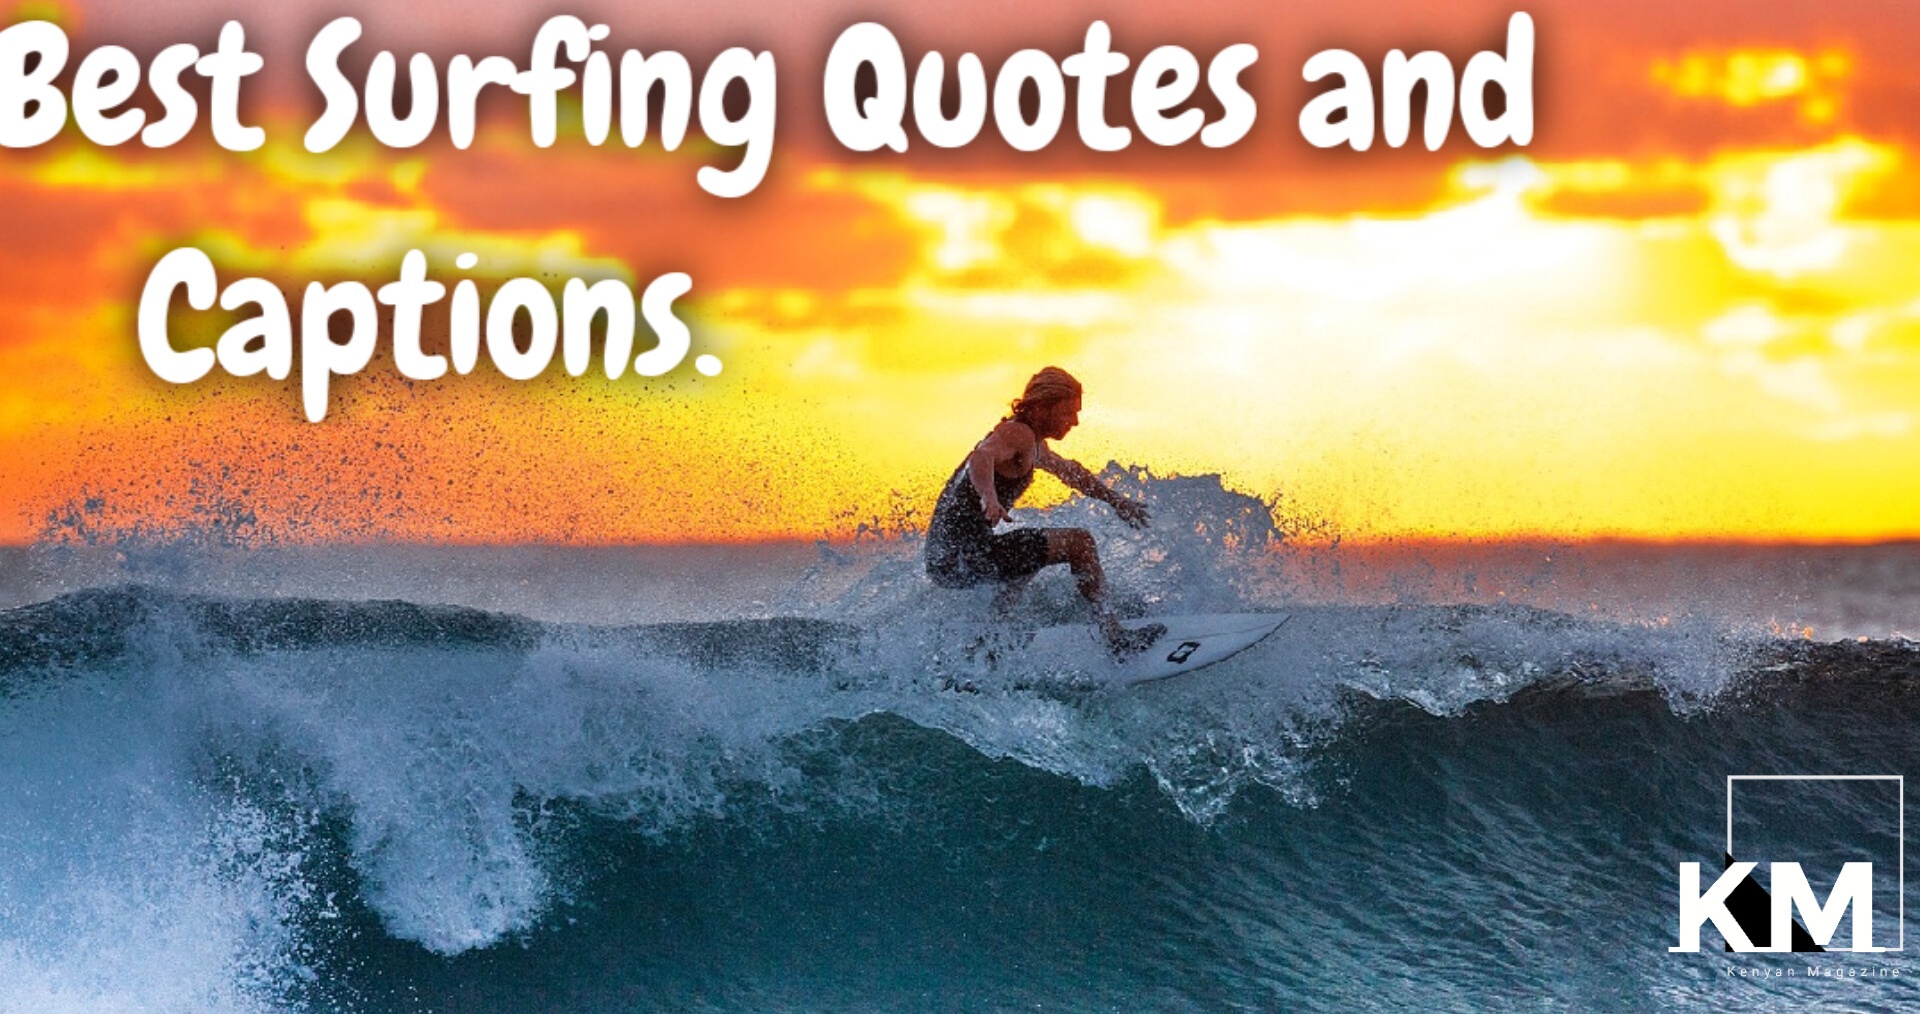 Surfing quotes and captions